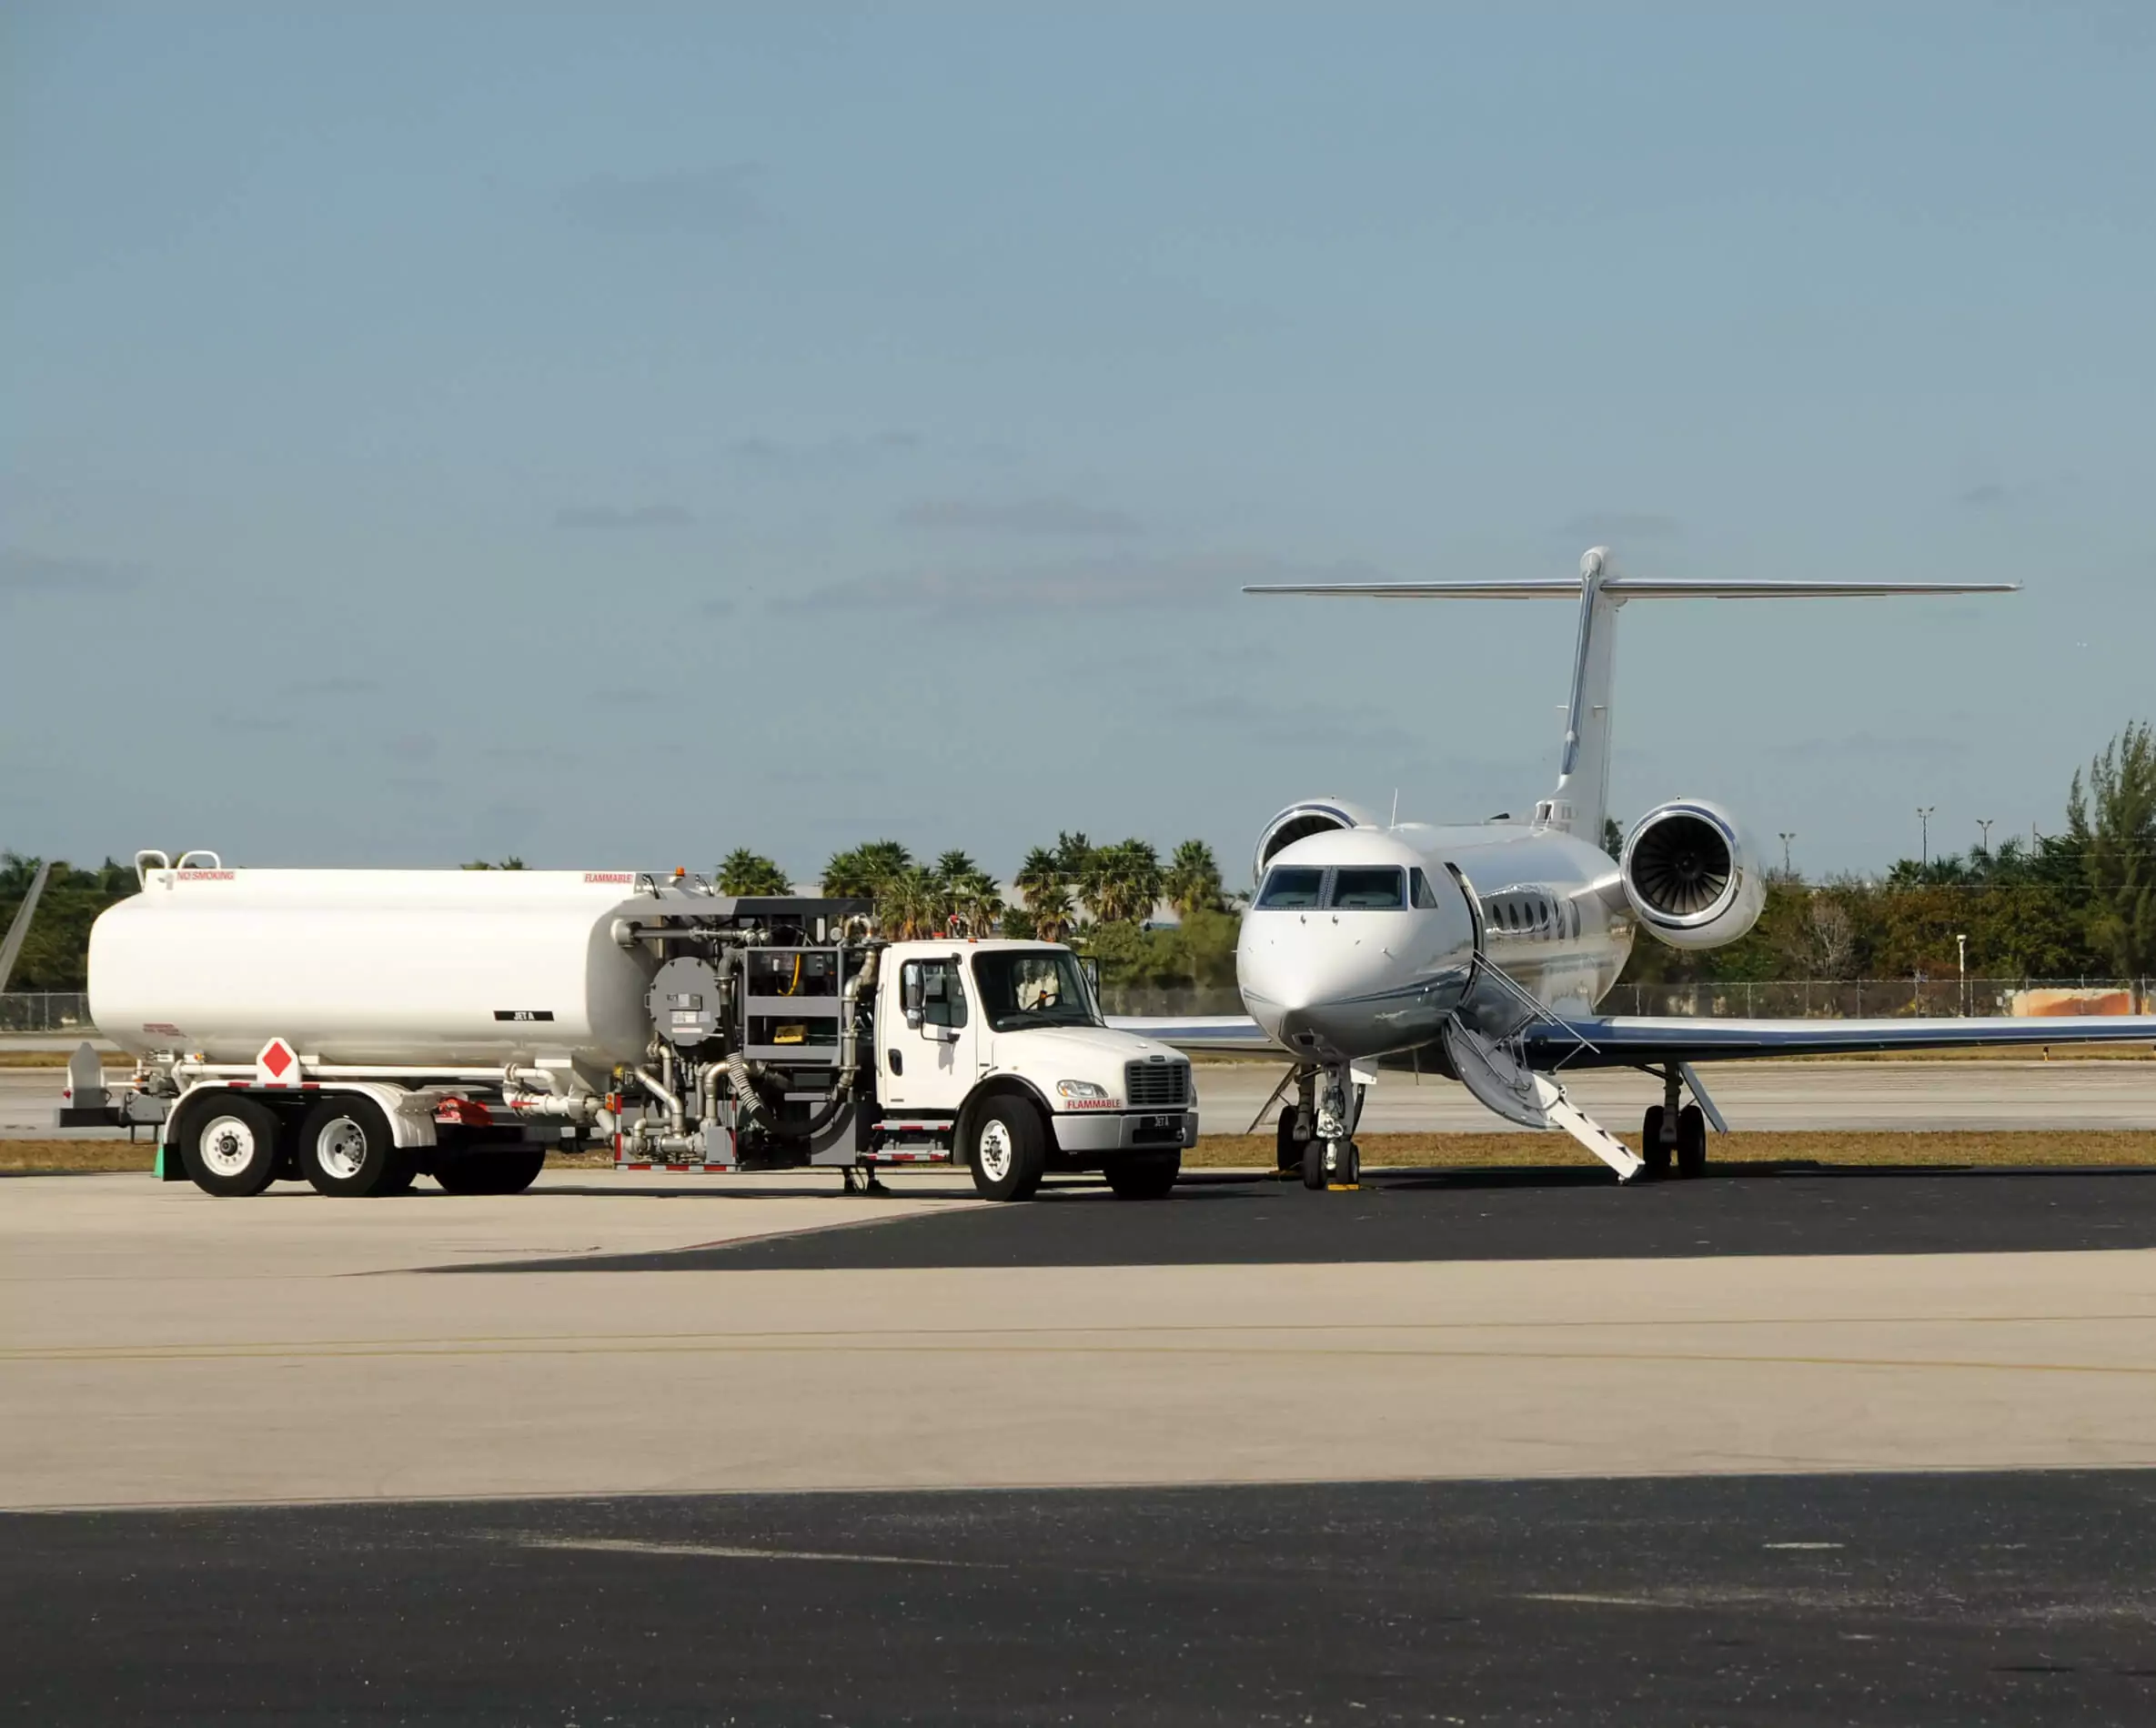 Private Jet fuel stop